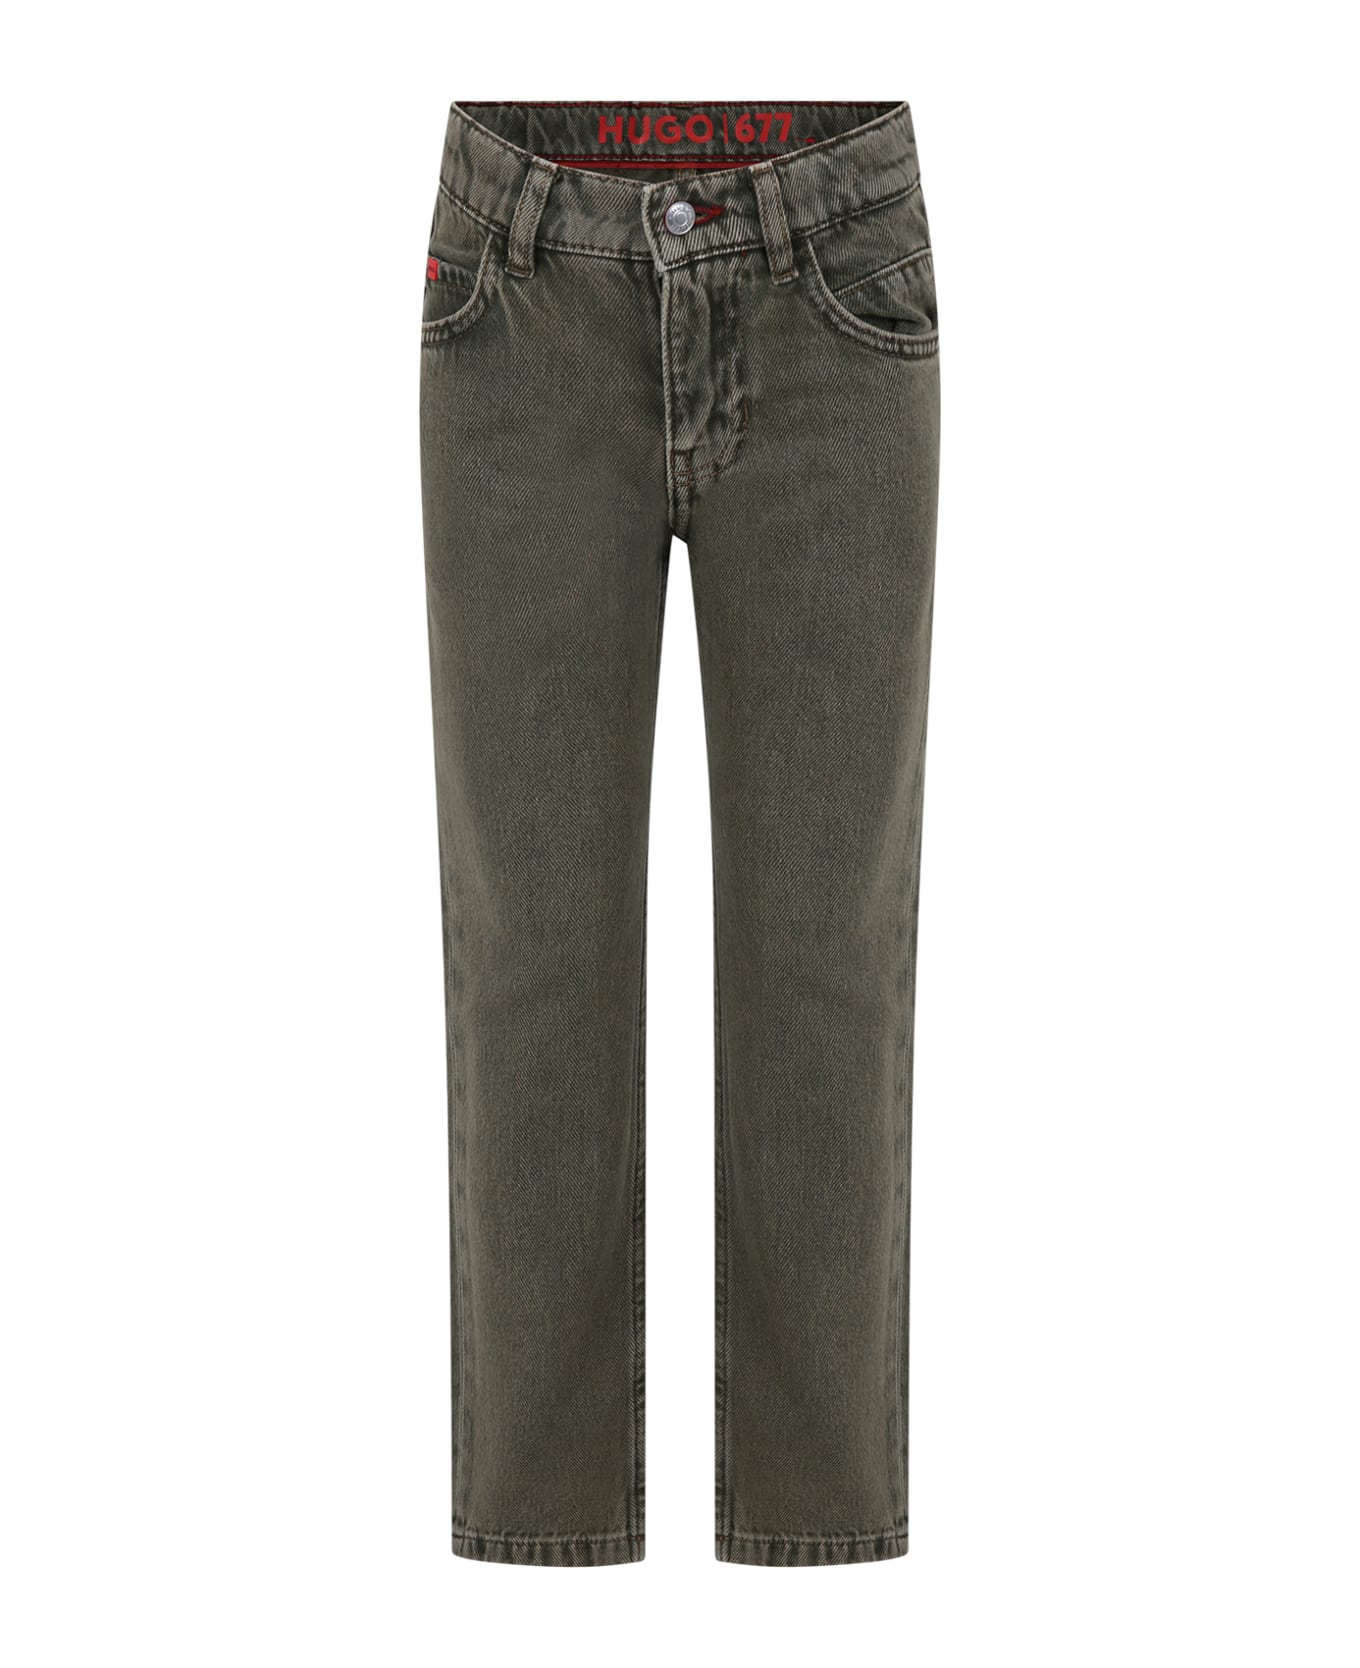 Hugo Boss Green Jeans For Boy With Logo - Green ボトムス